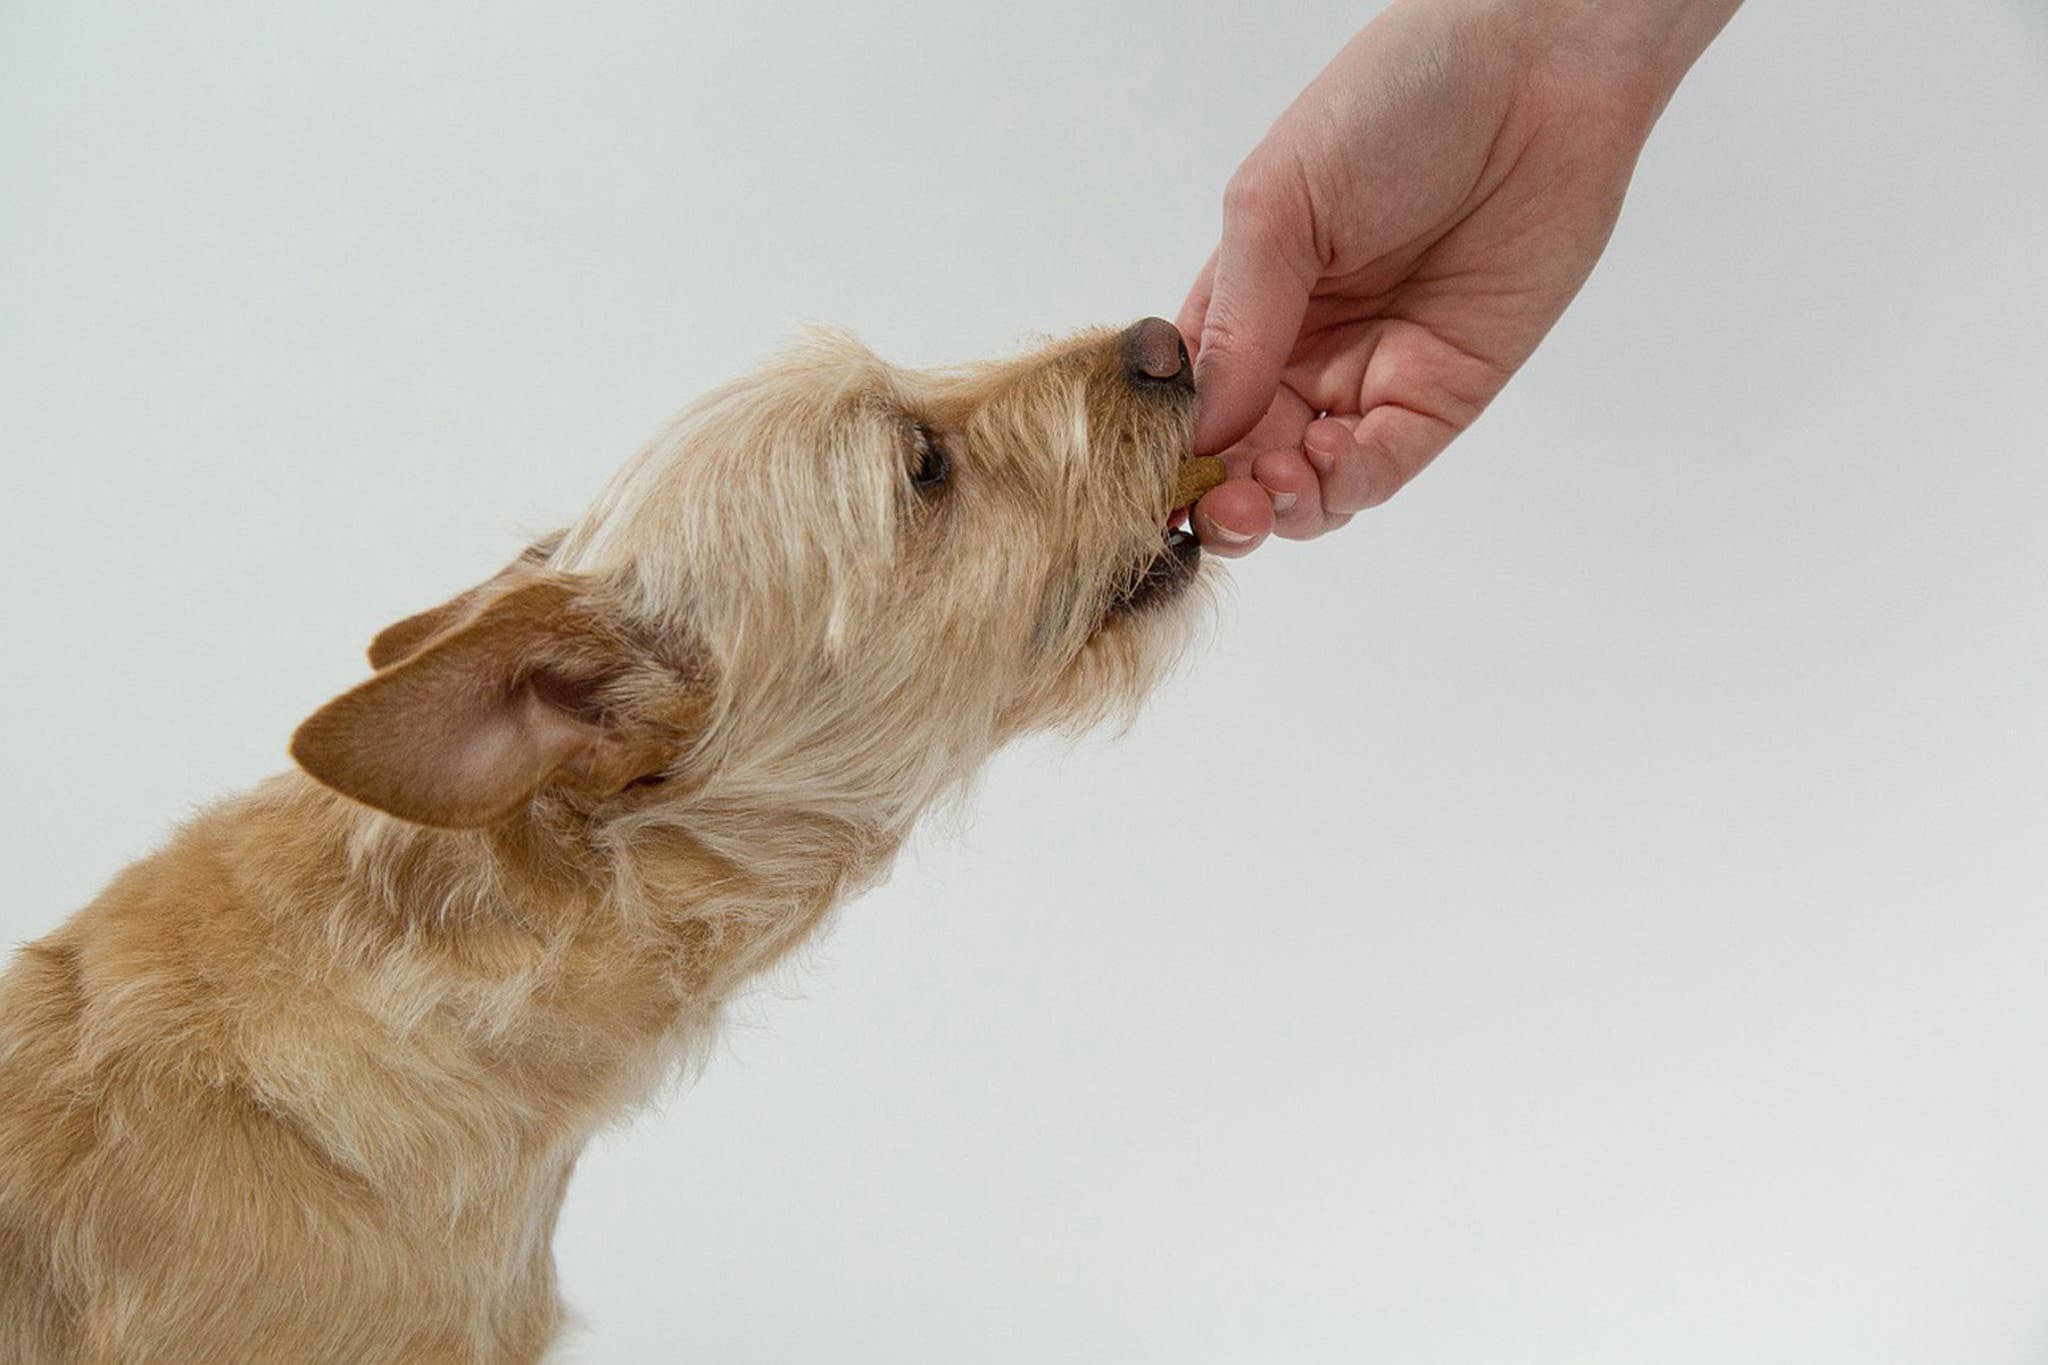 5 Tips to Give Your Dog Their Pills